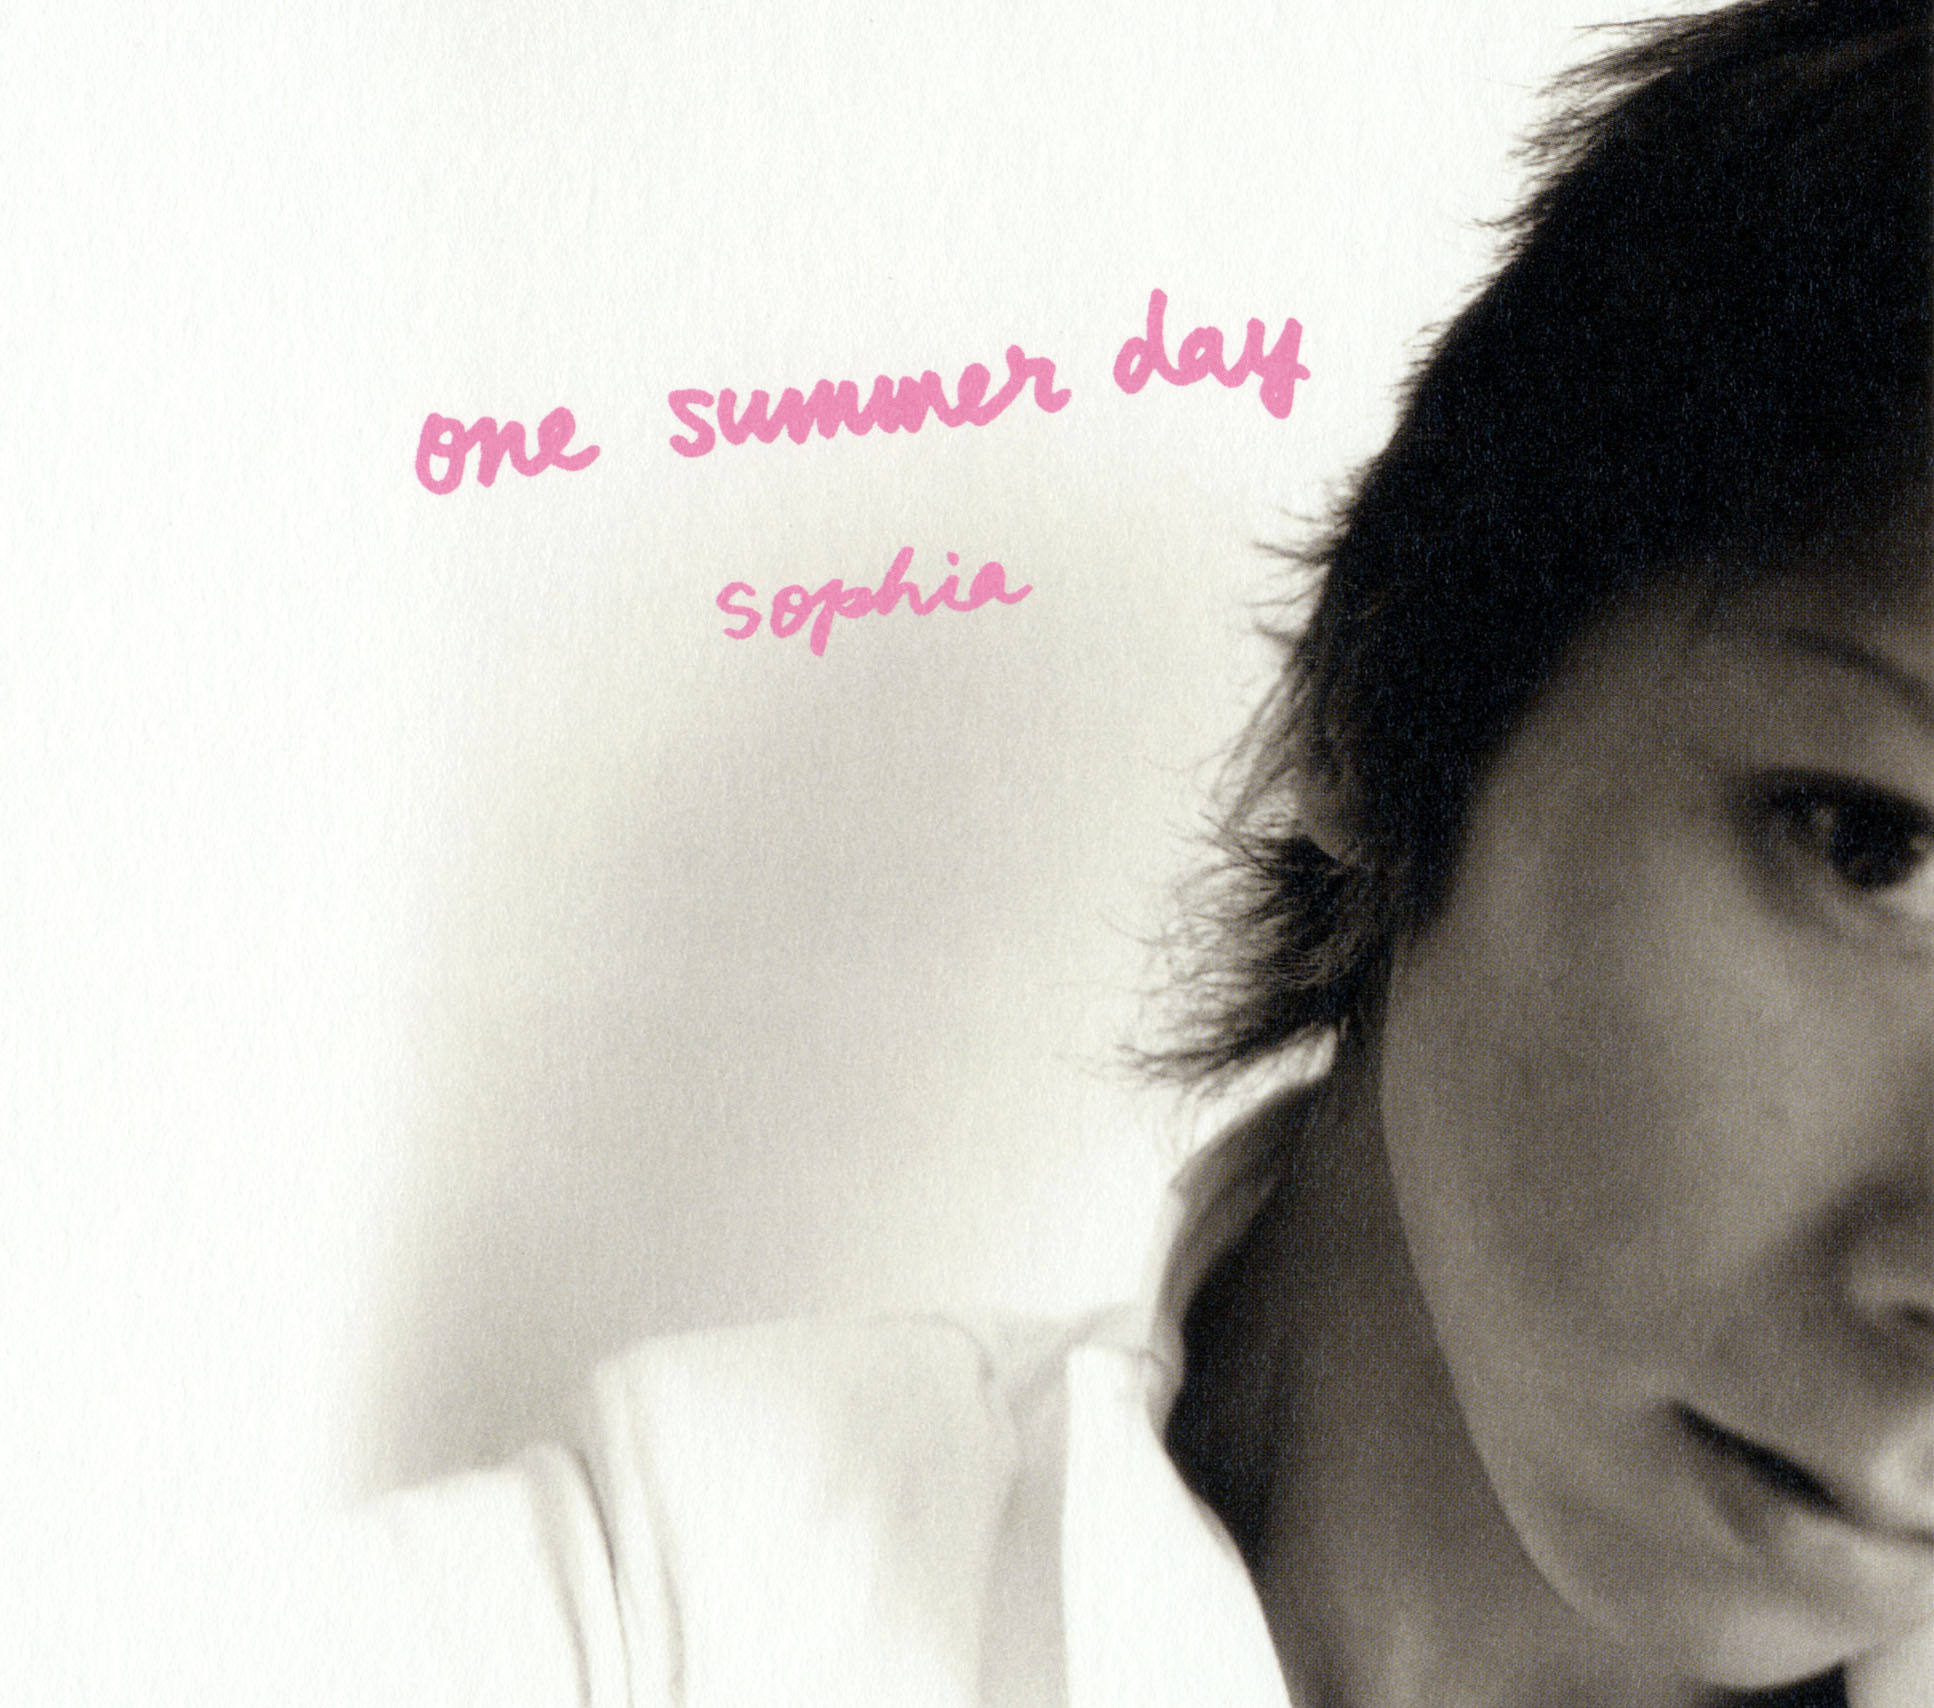 Sg「one summer day」(初回限定盤)